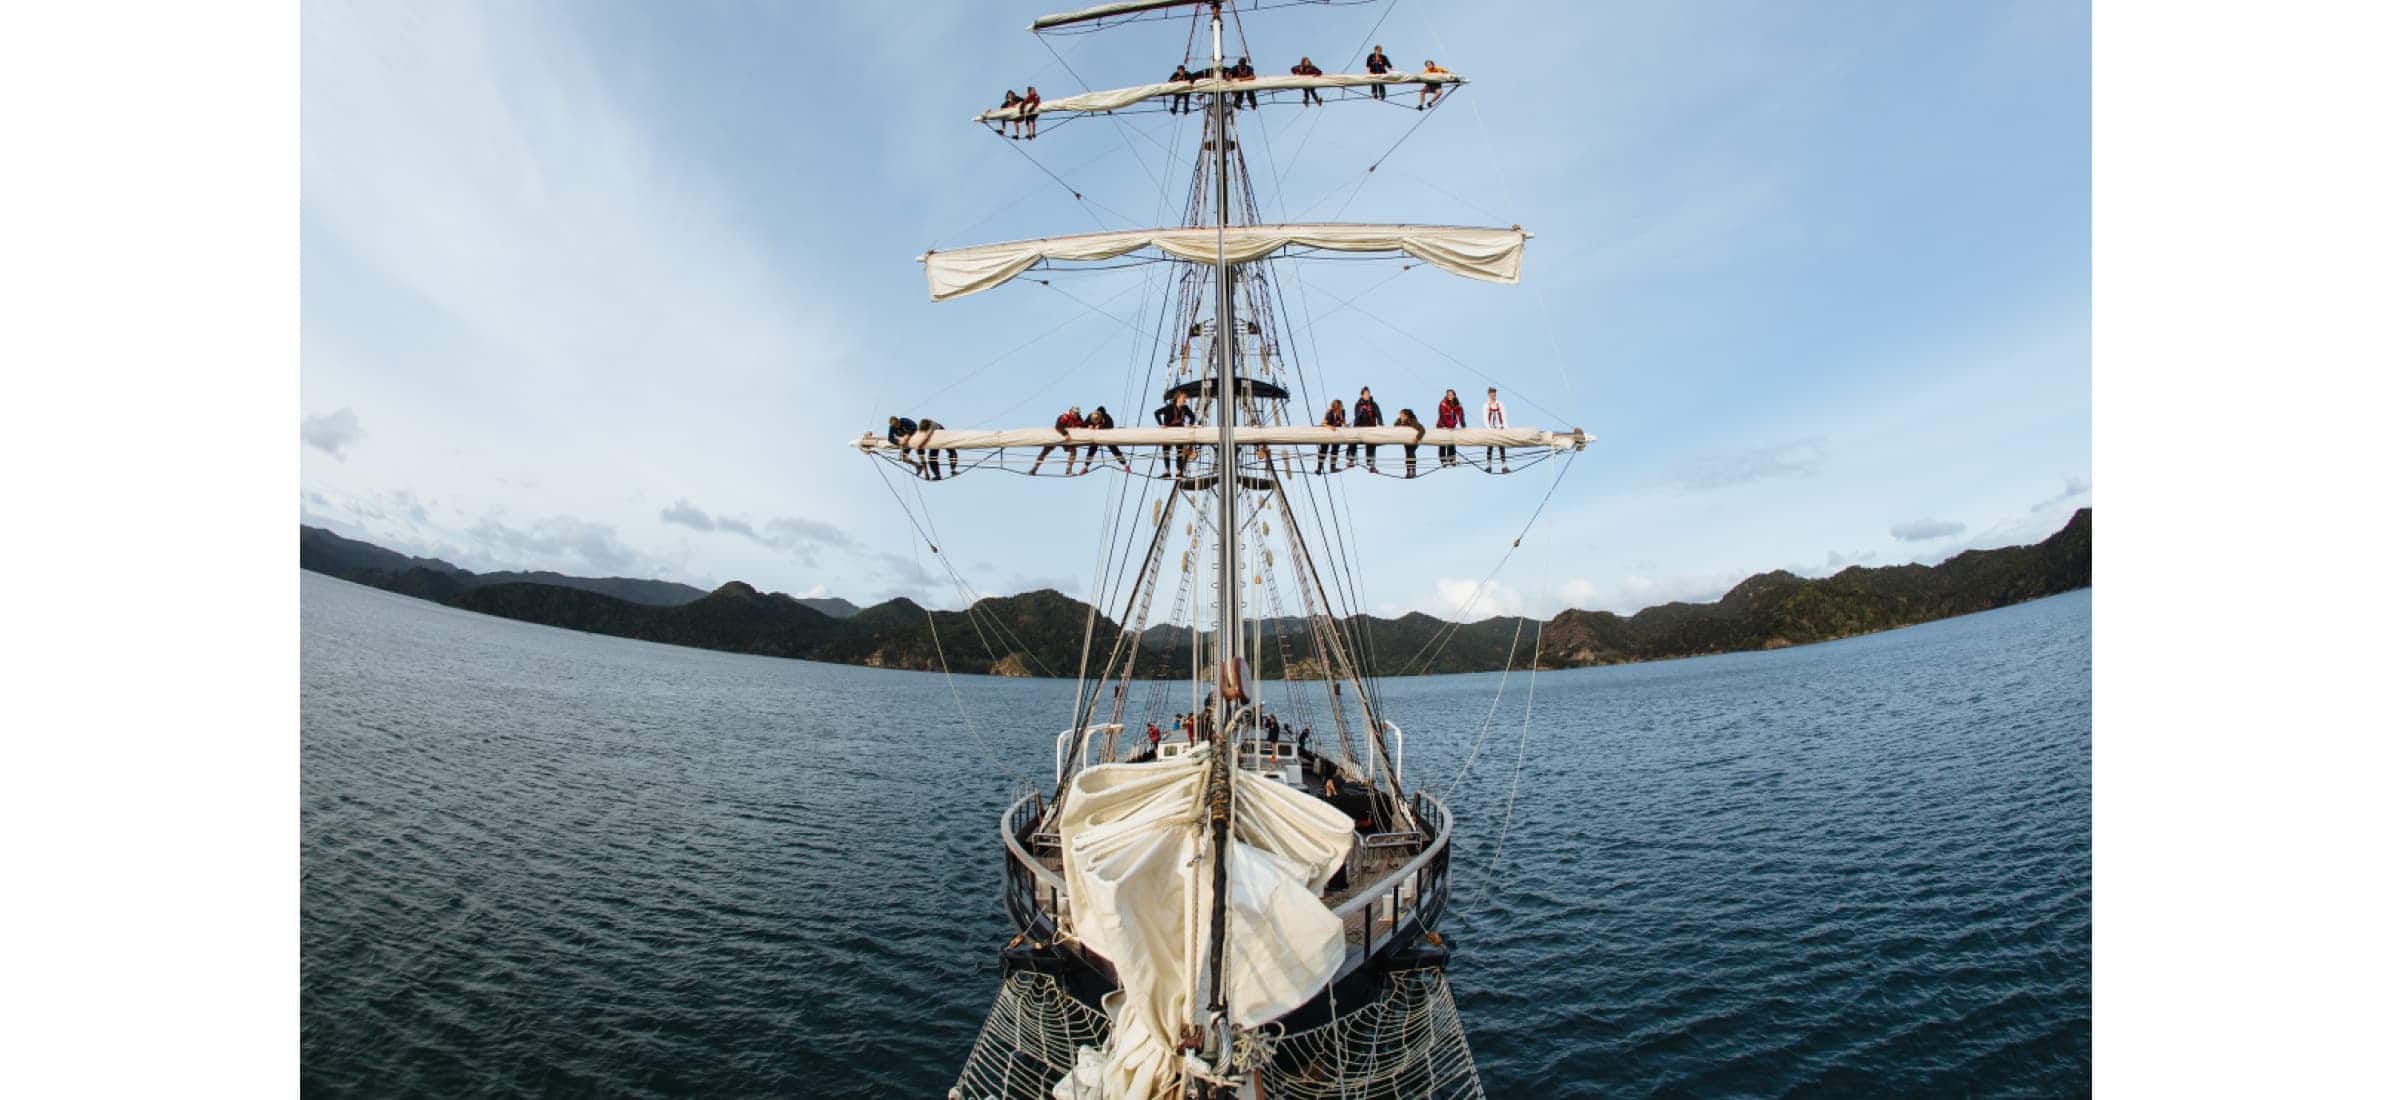 A view of the back of the Spirit of Adventure with passengers climbing across two of the yacht’s masts.